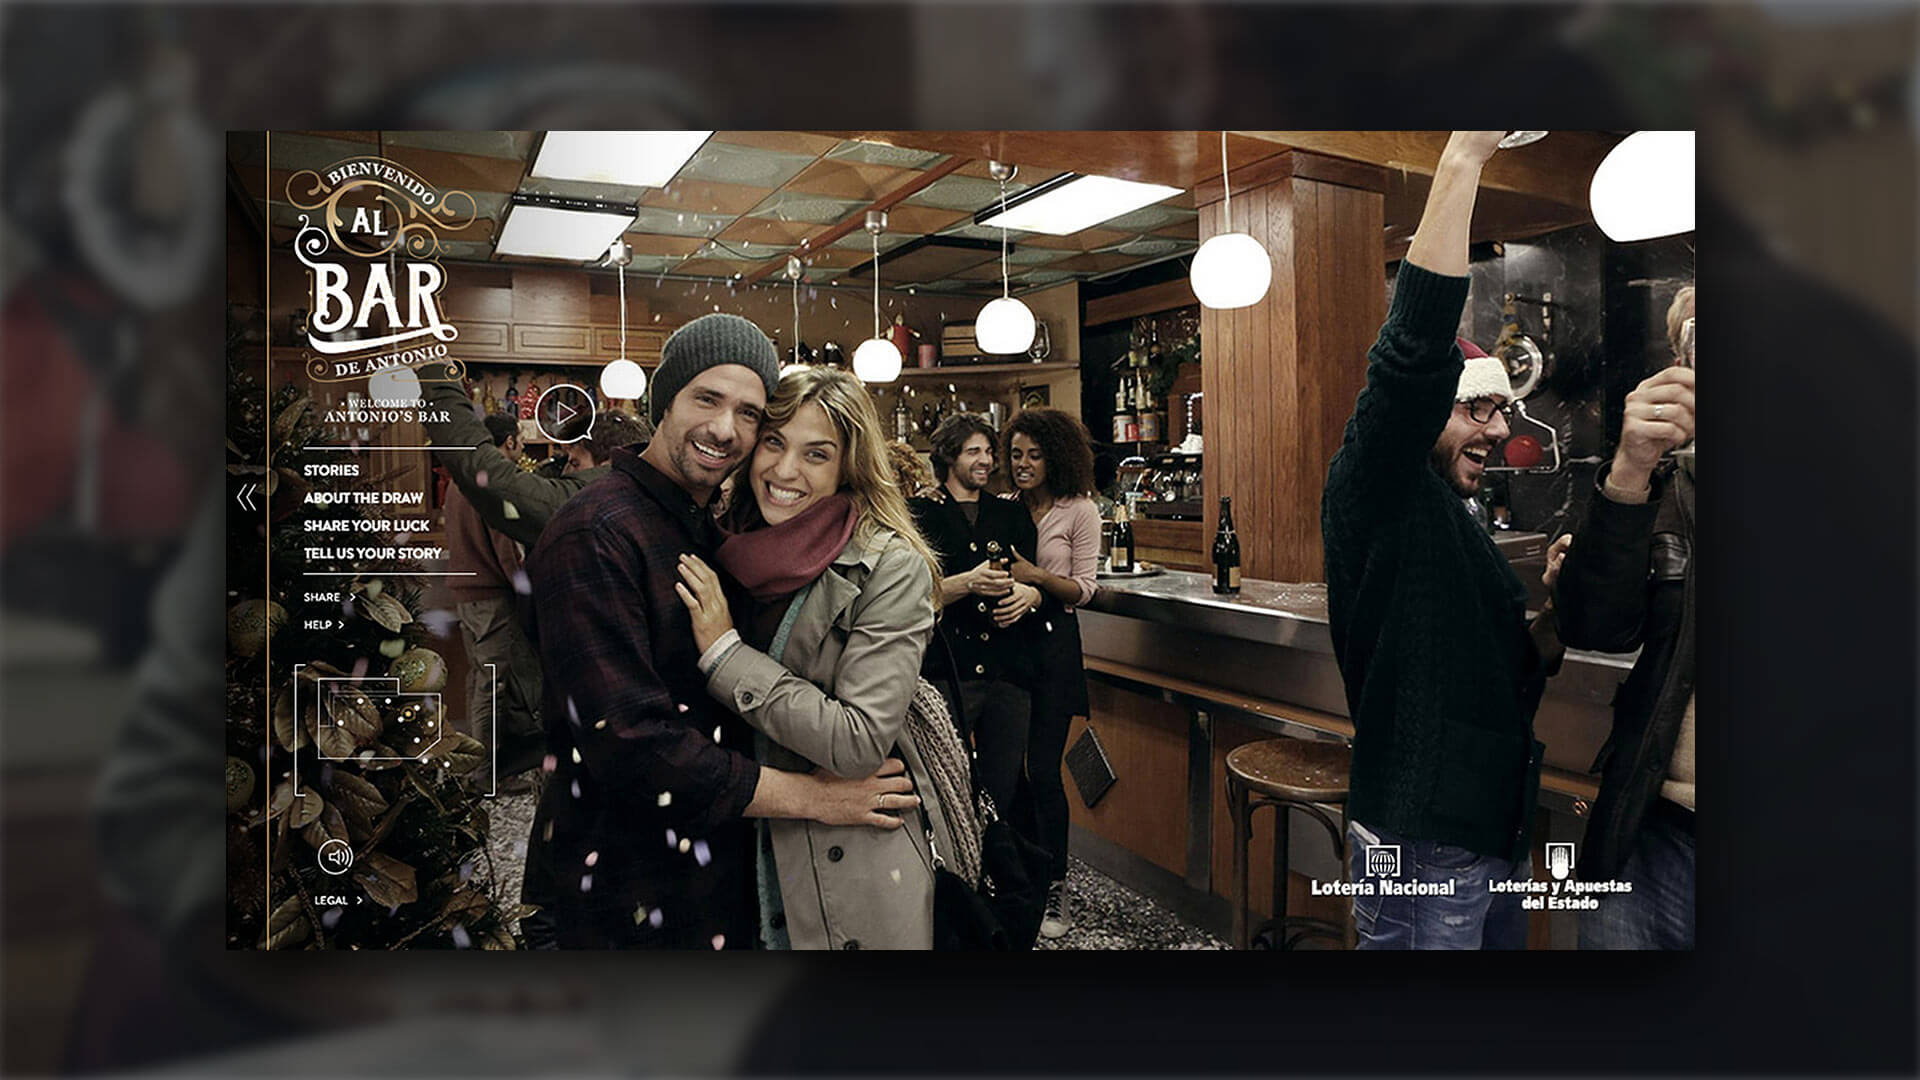 Art direction for the Christmas Campaign of the Spanish National Lottery